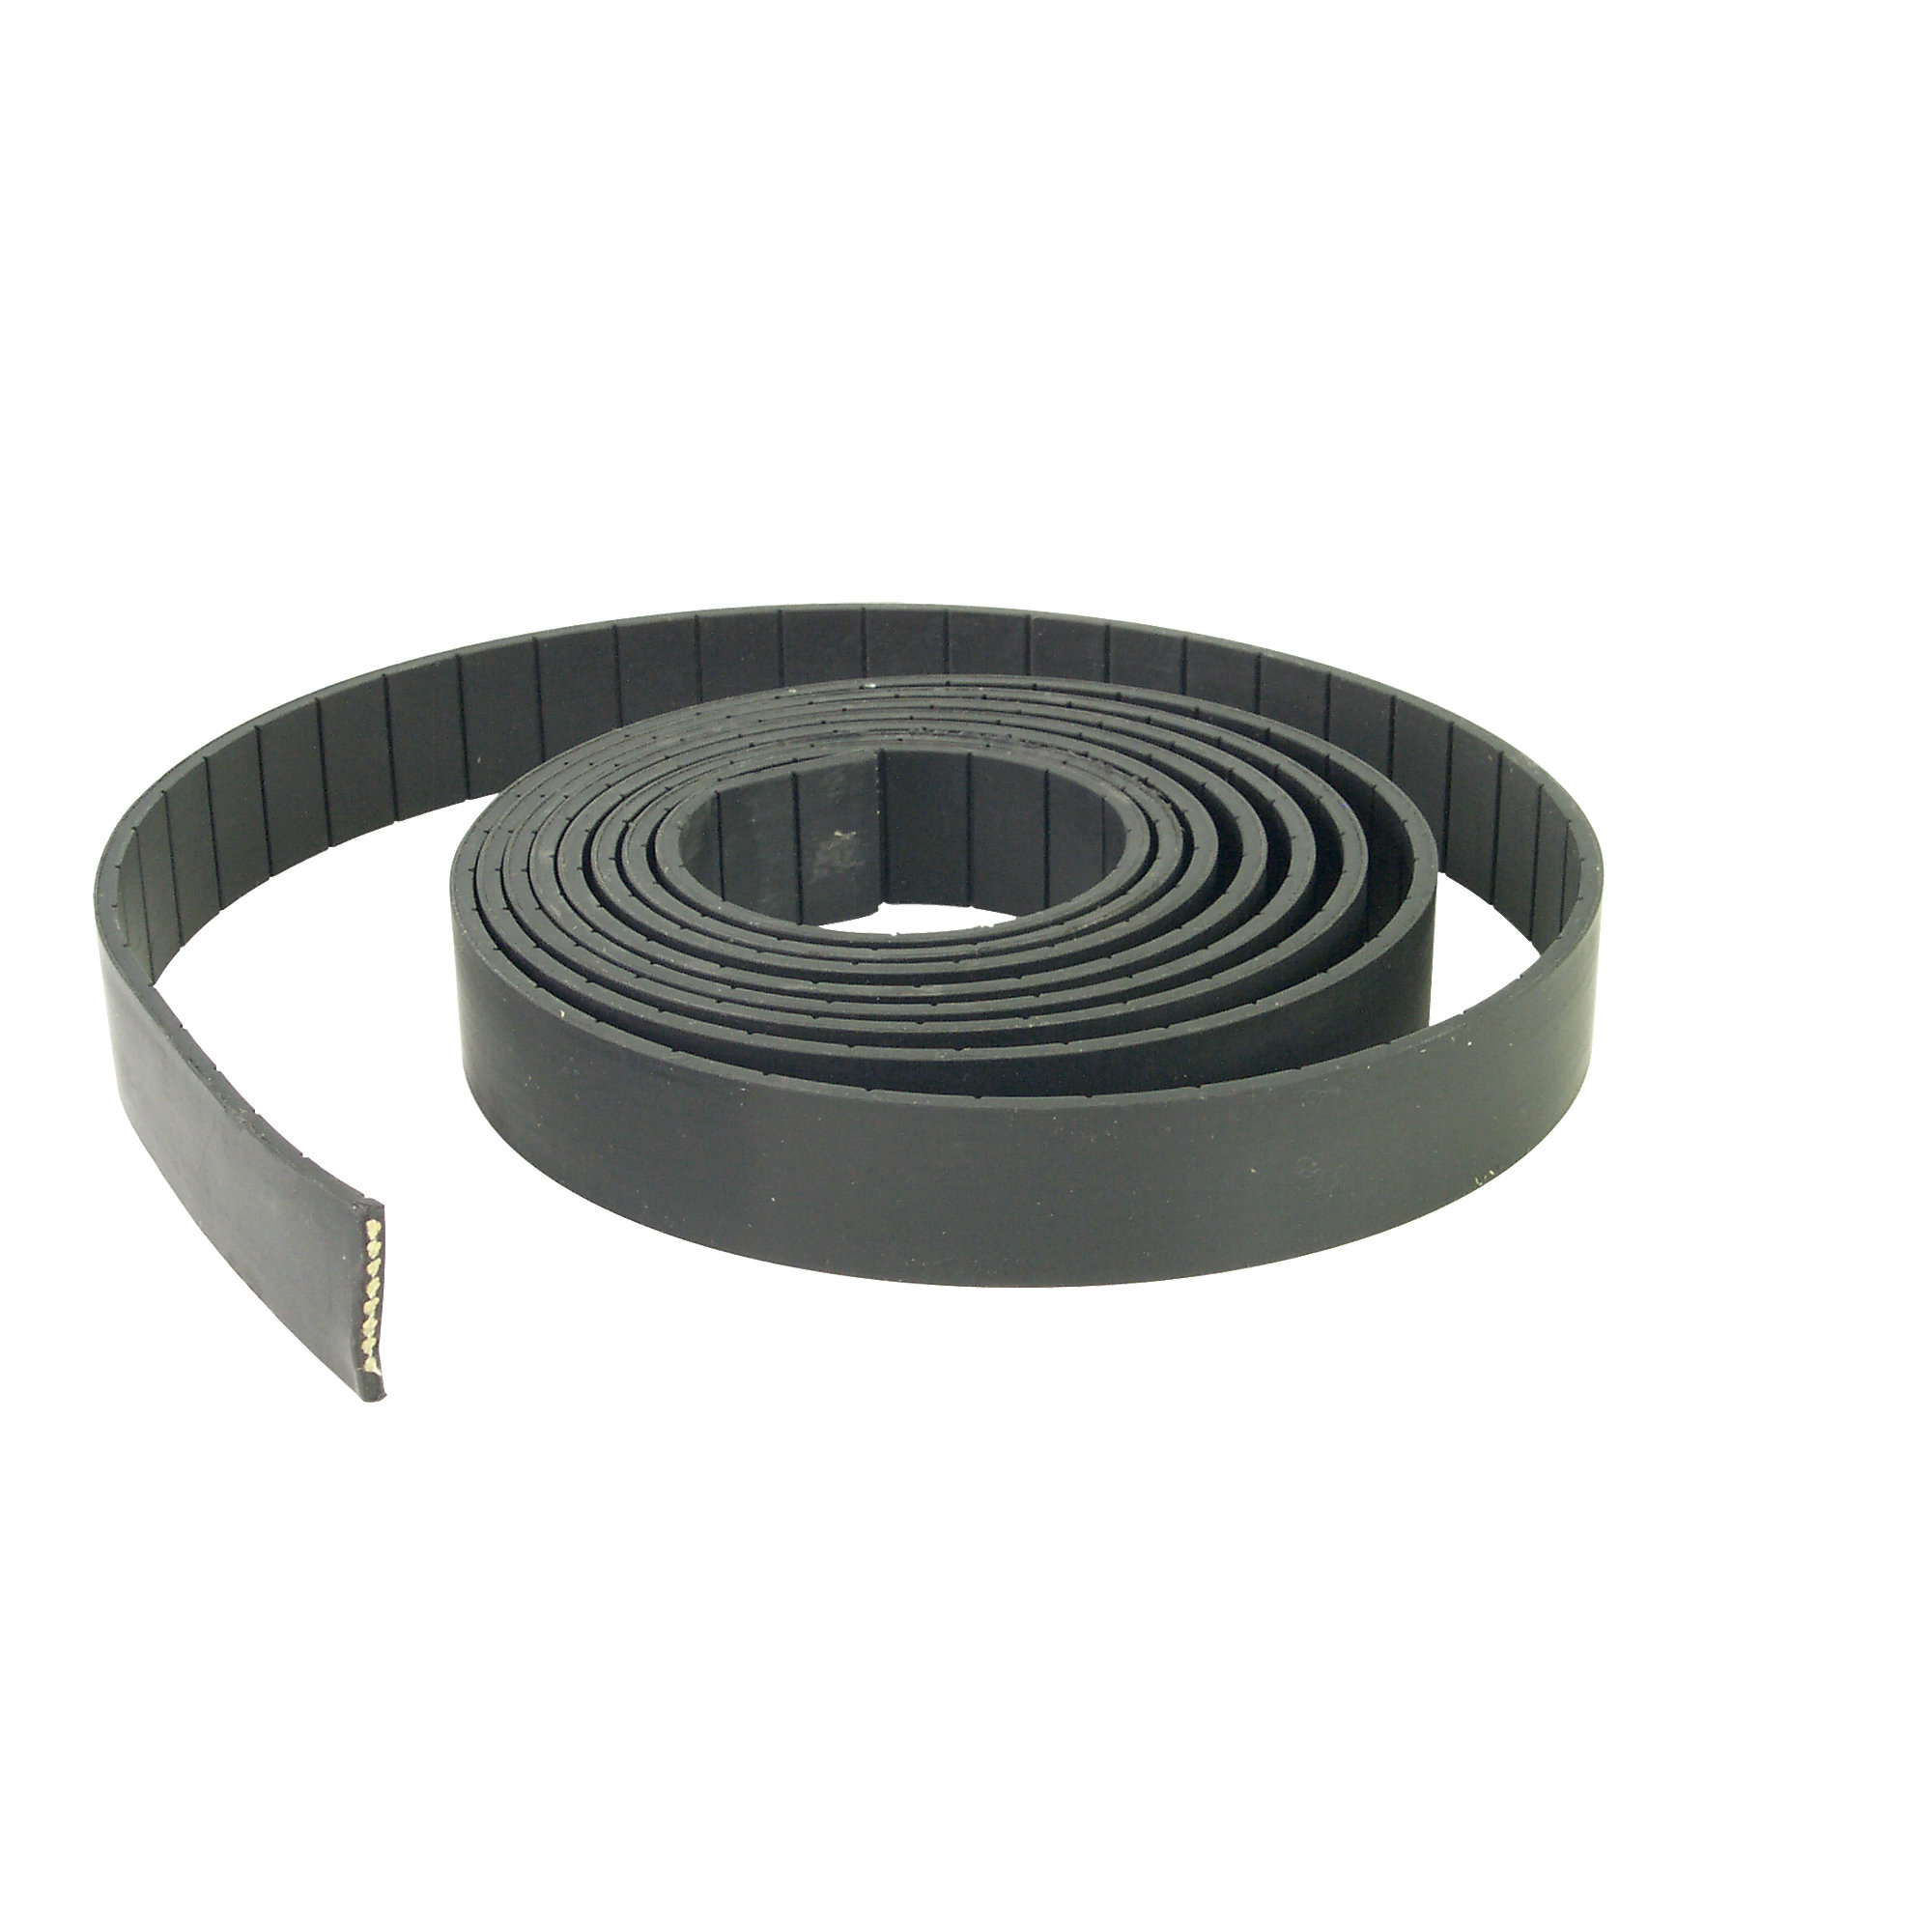 Weight Stack Belt for Cybex VR2 Pulldown 4515, Length Required is 7.58 ft